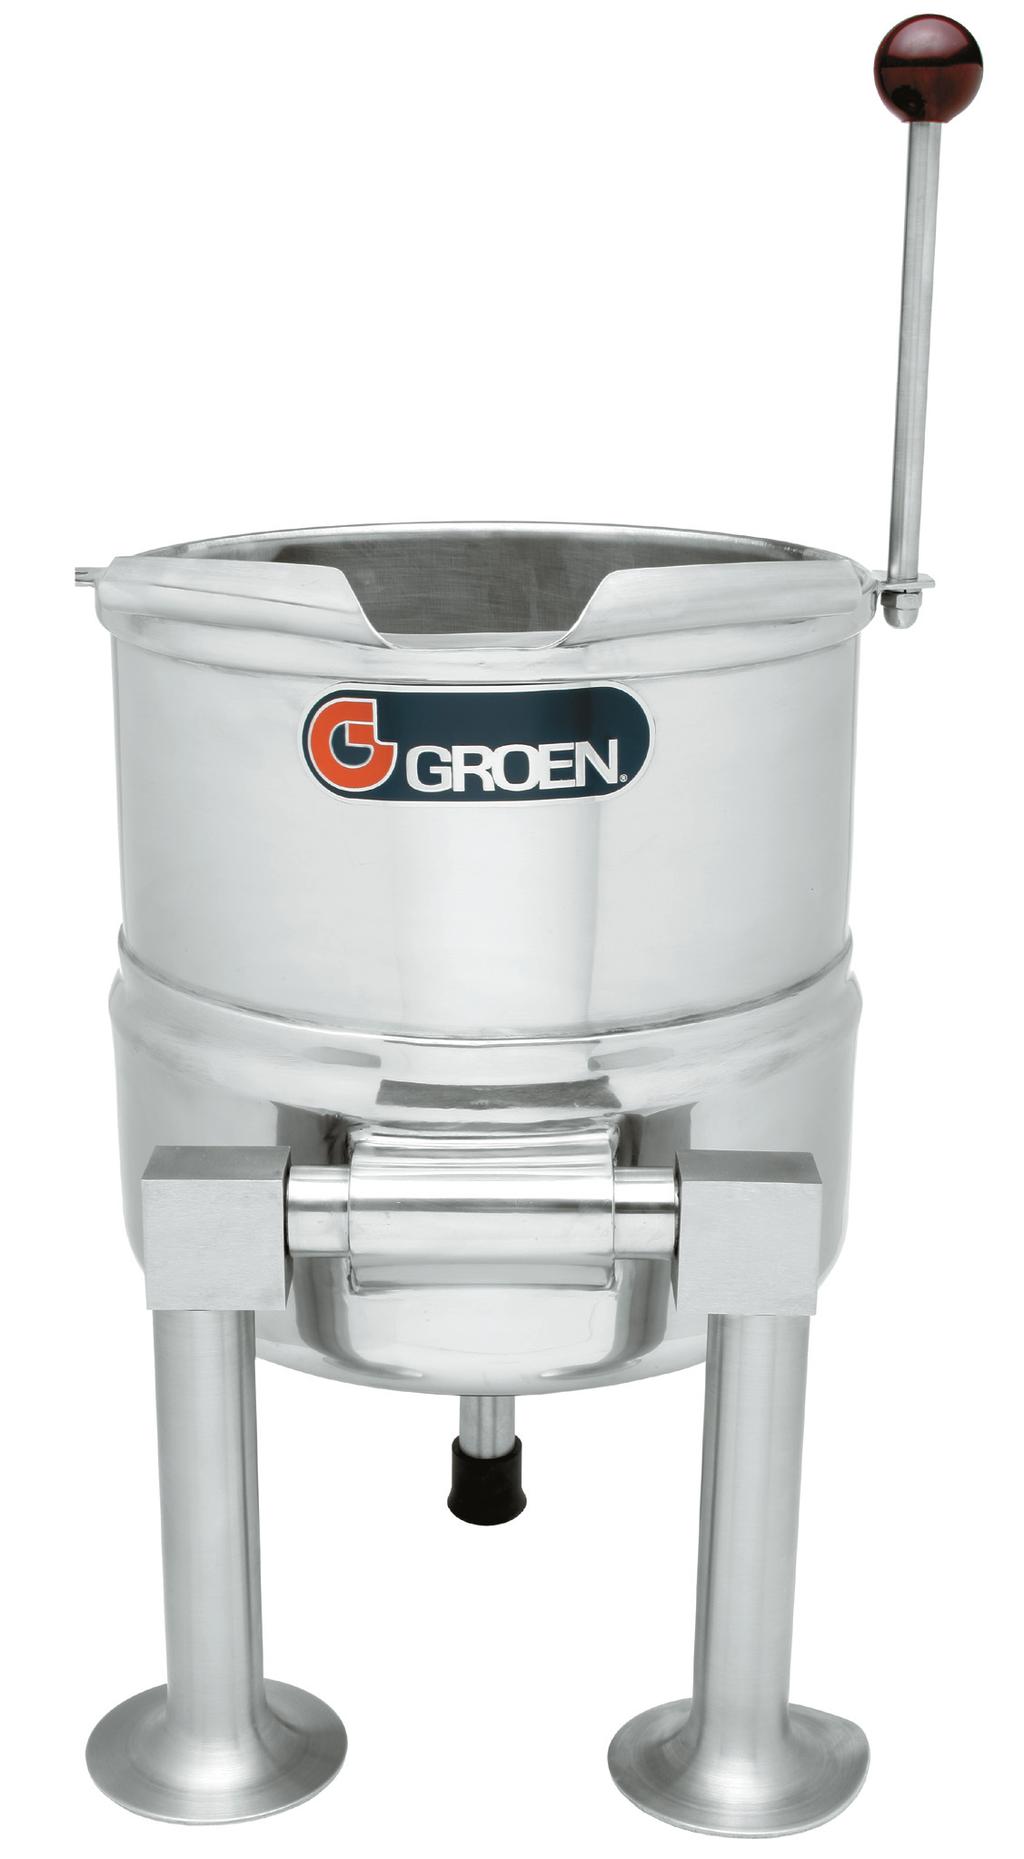 What Can You Prepare in a Groen Kettle? Anything that can be prepared in a stock pot can be prepared faster and more efficiently in a Groen Steam Jacketed Kettle.